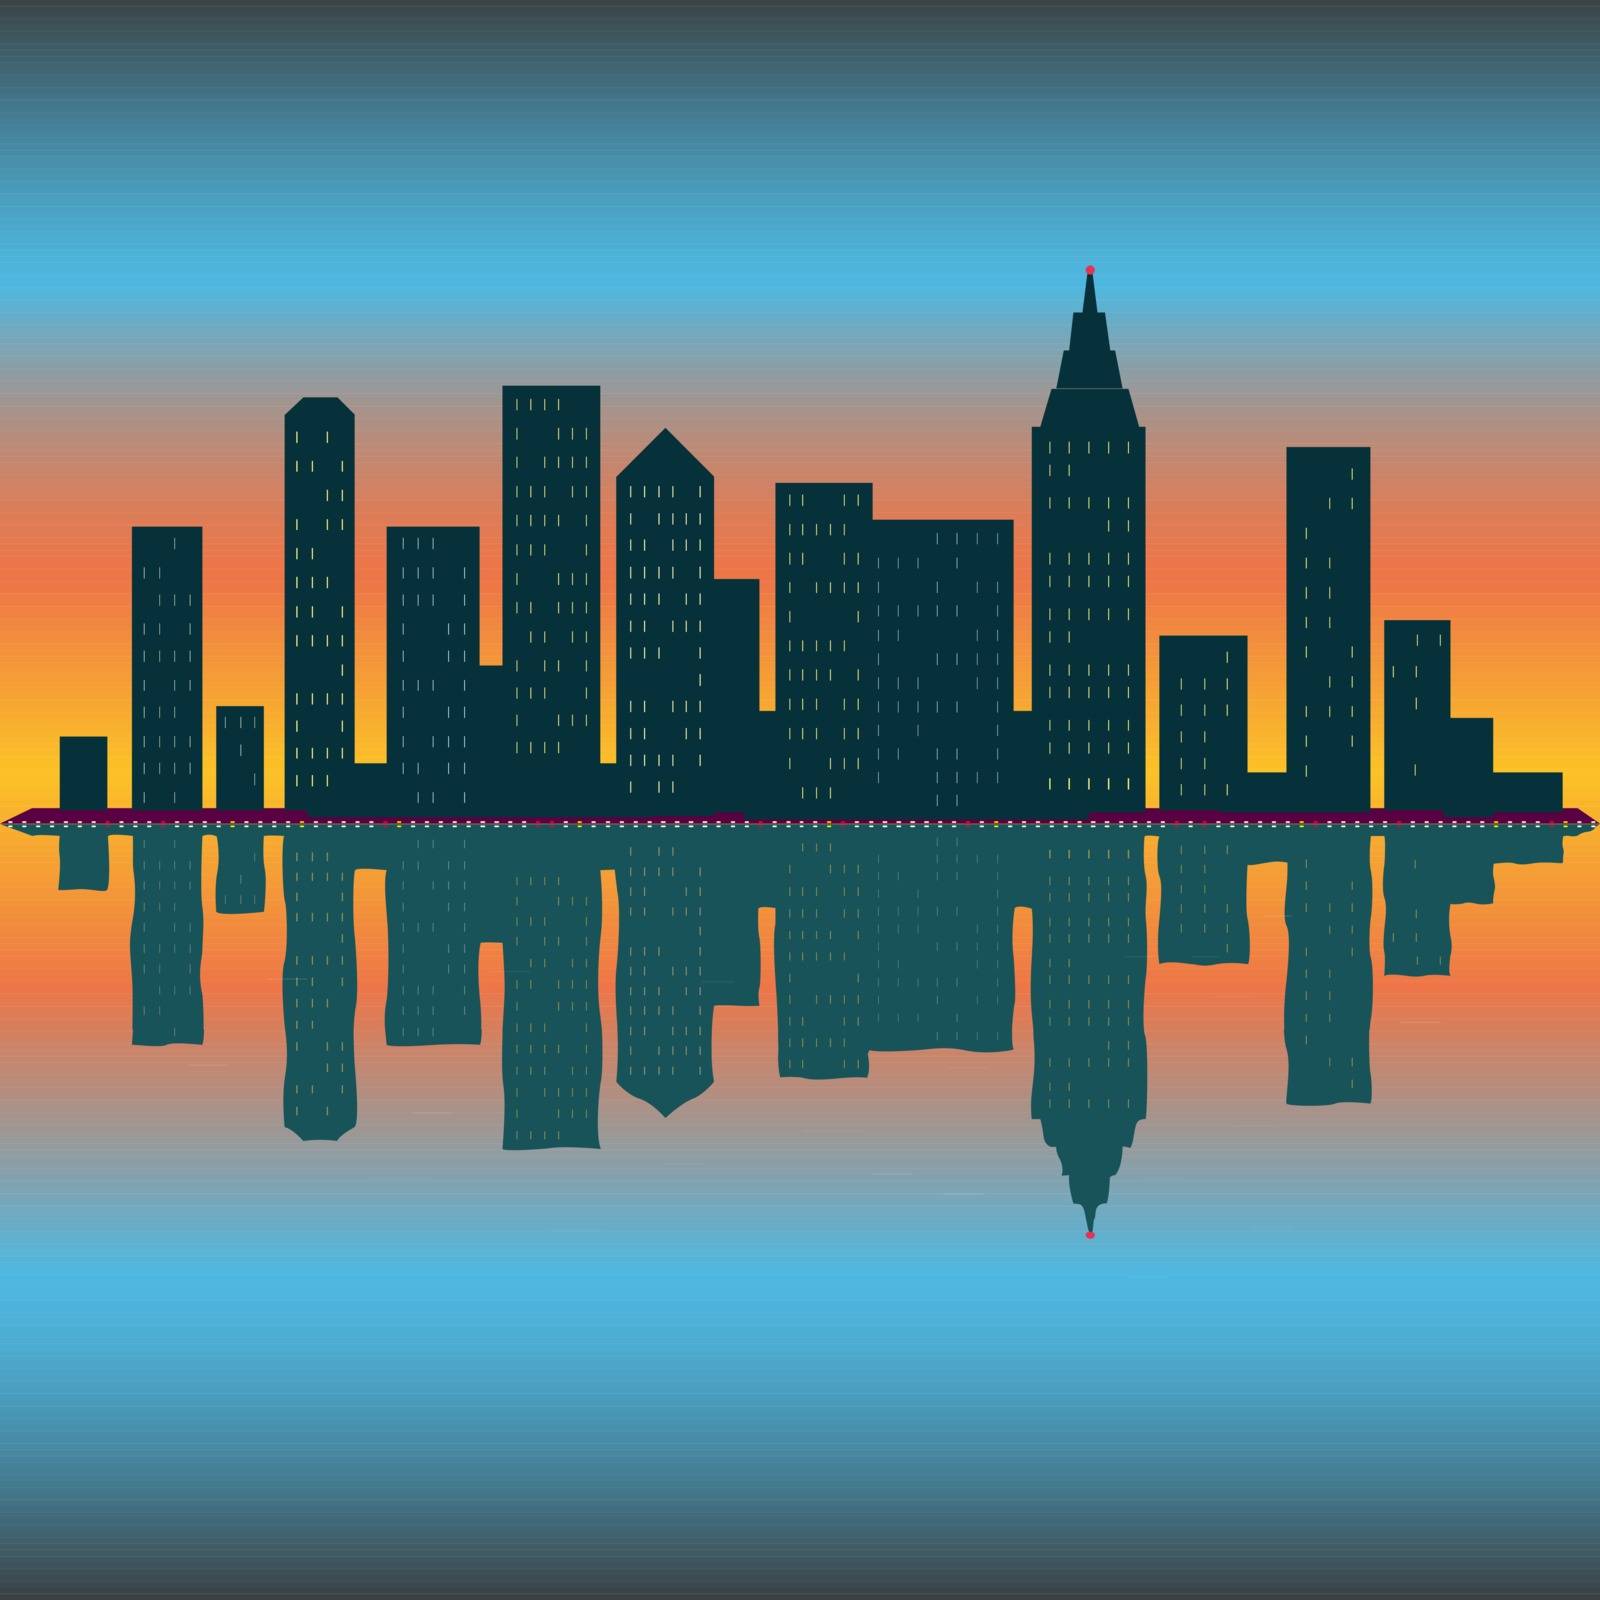 Cityscape vector background. Skyline wallpaper with skyscrapers in sunset or sunrise. Eps10 vector illustration.